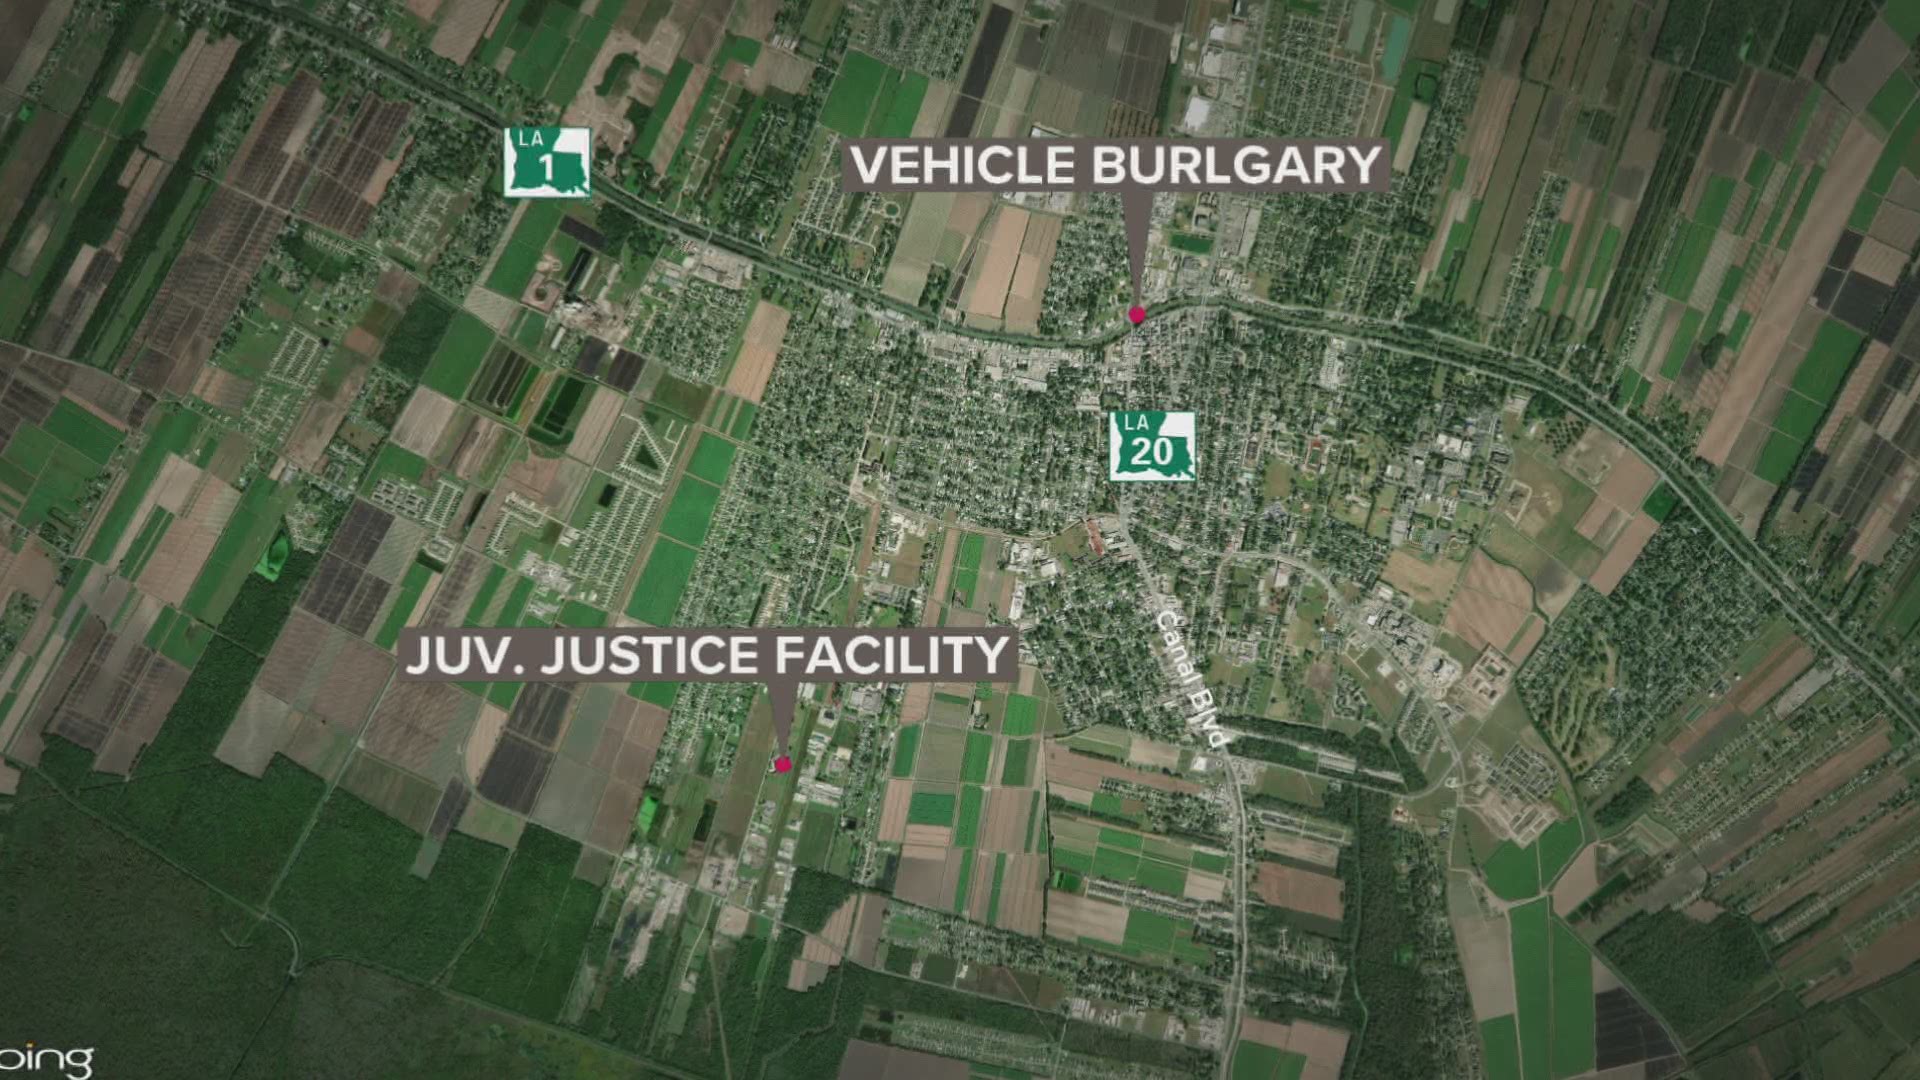 A teenager was arrested Thursday morning after running away from a Thibodaux justice center, steals a bus and tries to steal a vehicle.